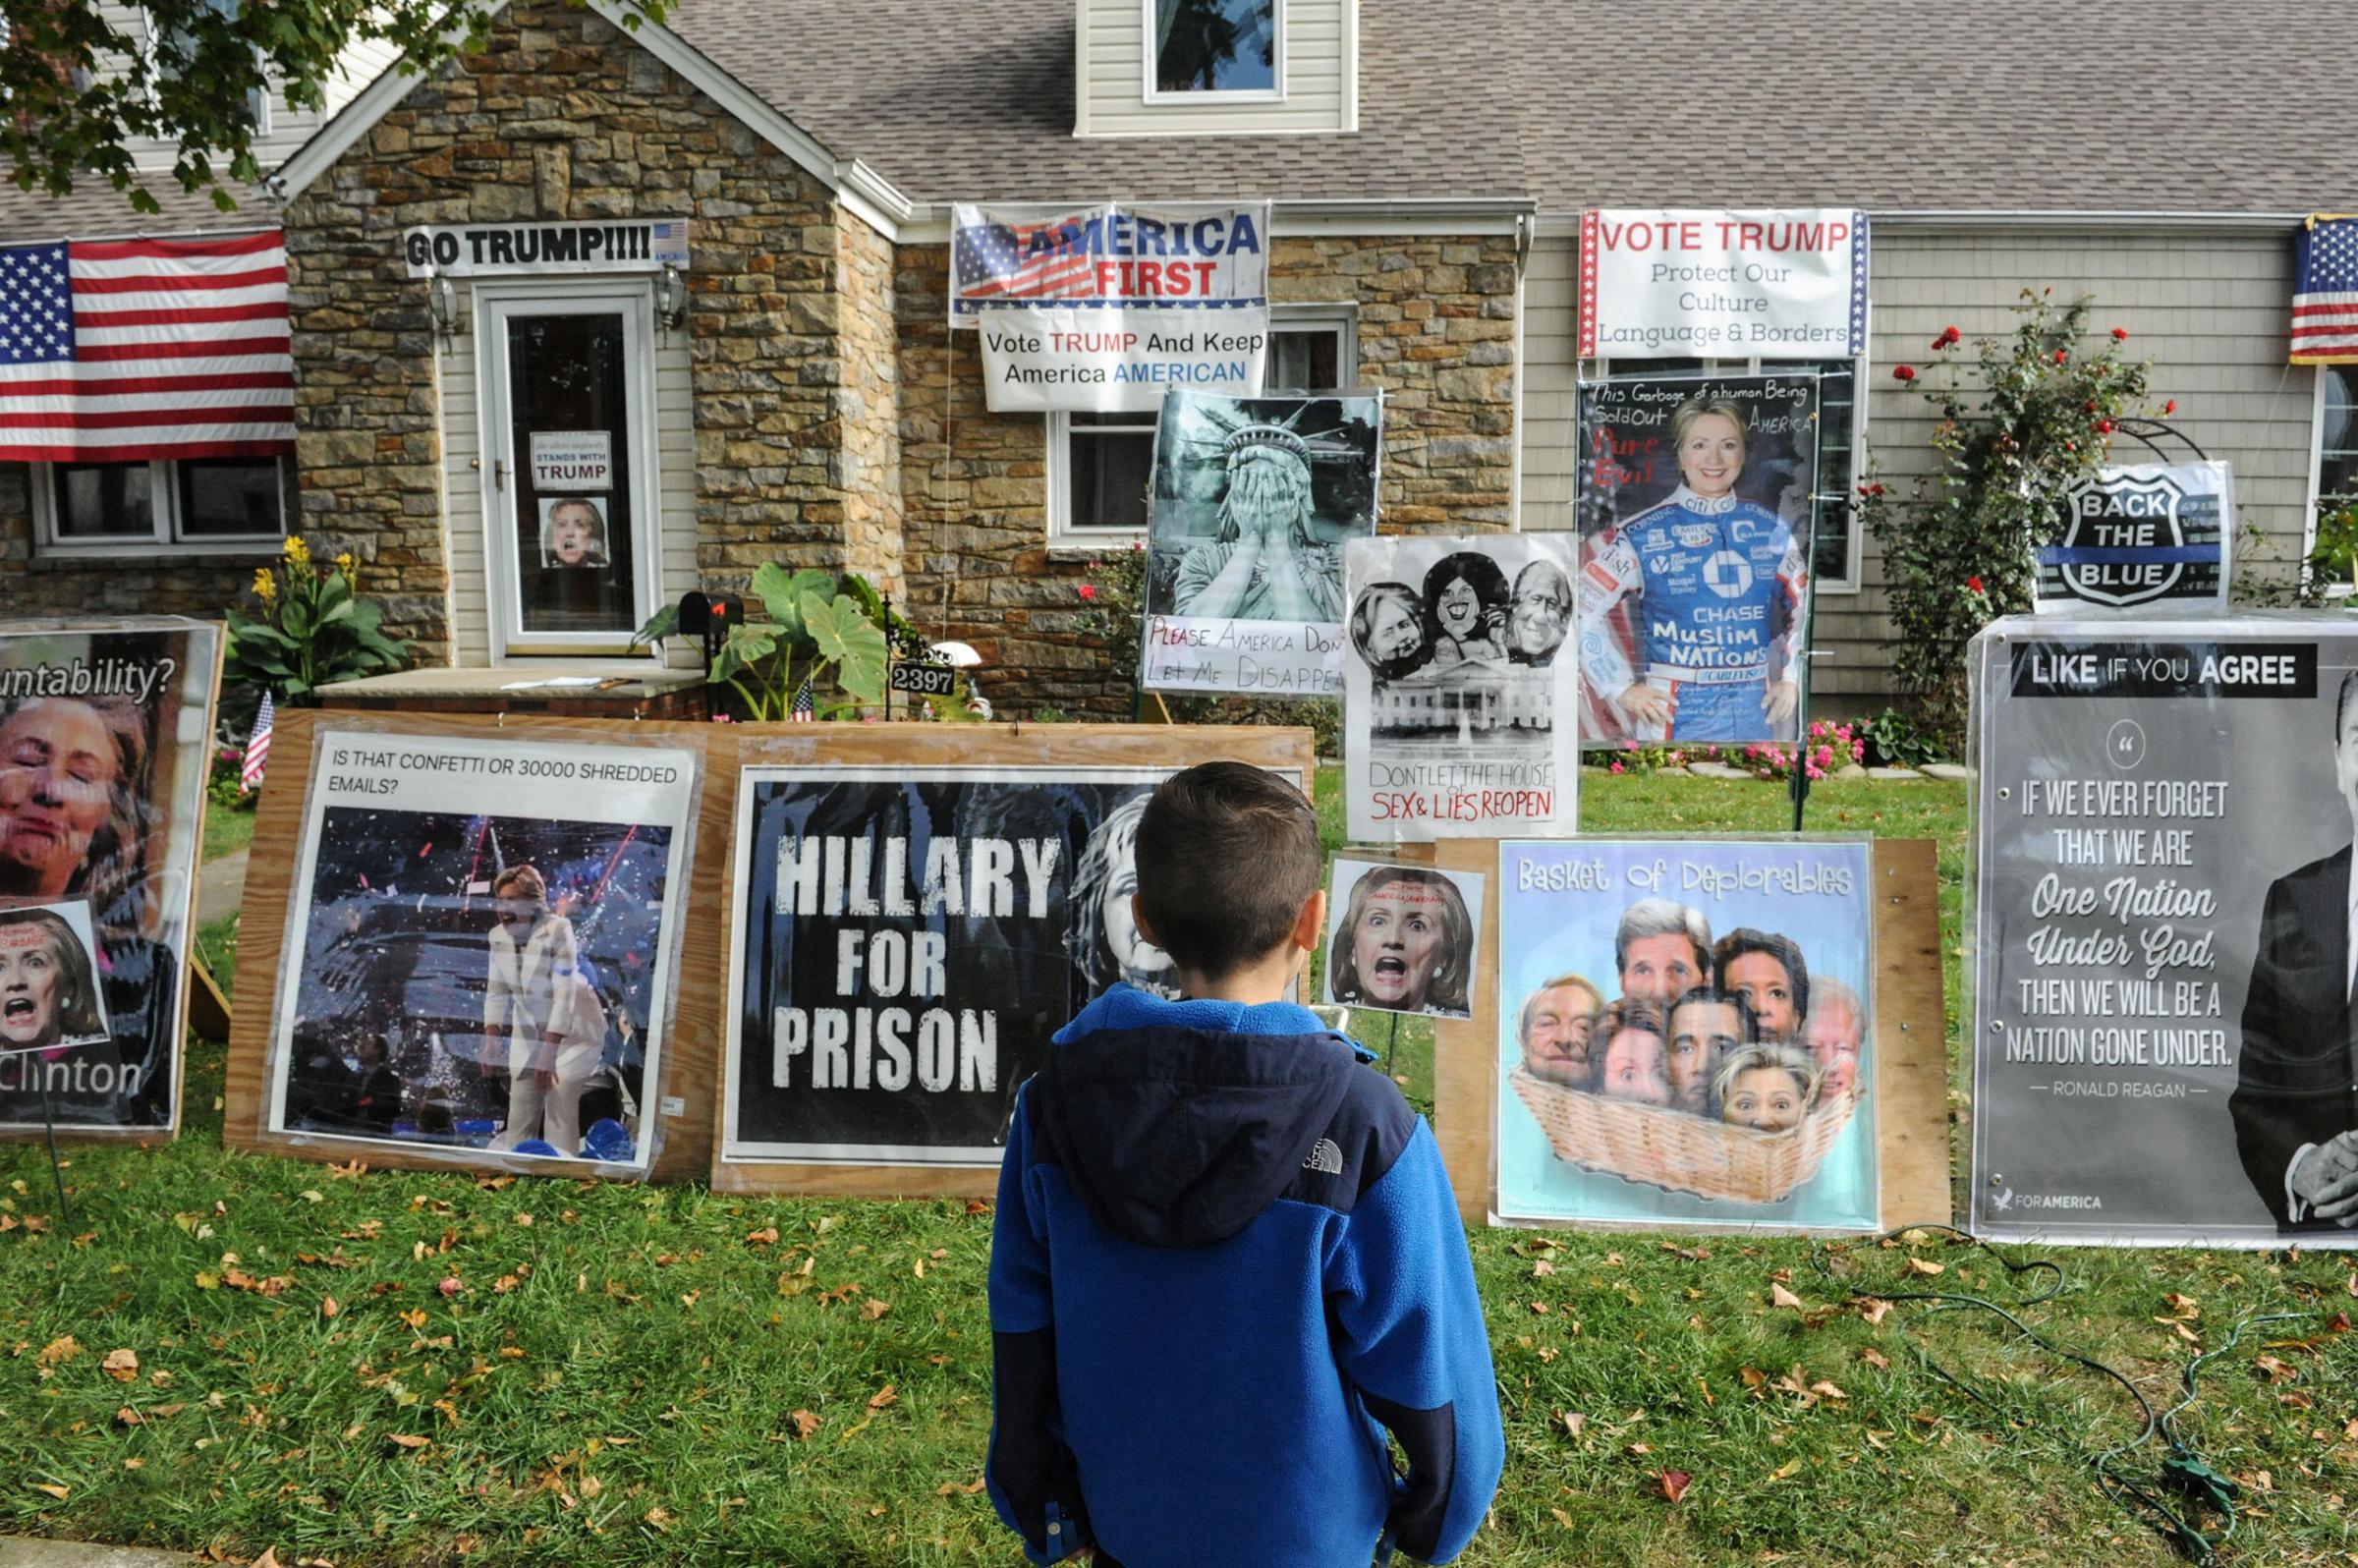 Dominick Vaglica, age 7, looks at a home displaying signs supporting Donald Trump and criticizing Hillary Clinton in Bellmore, NY, on Oct. 29, 2016.